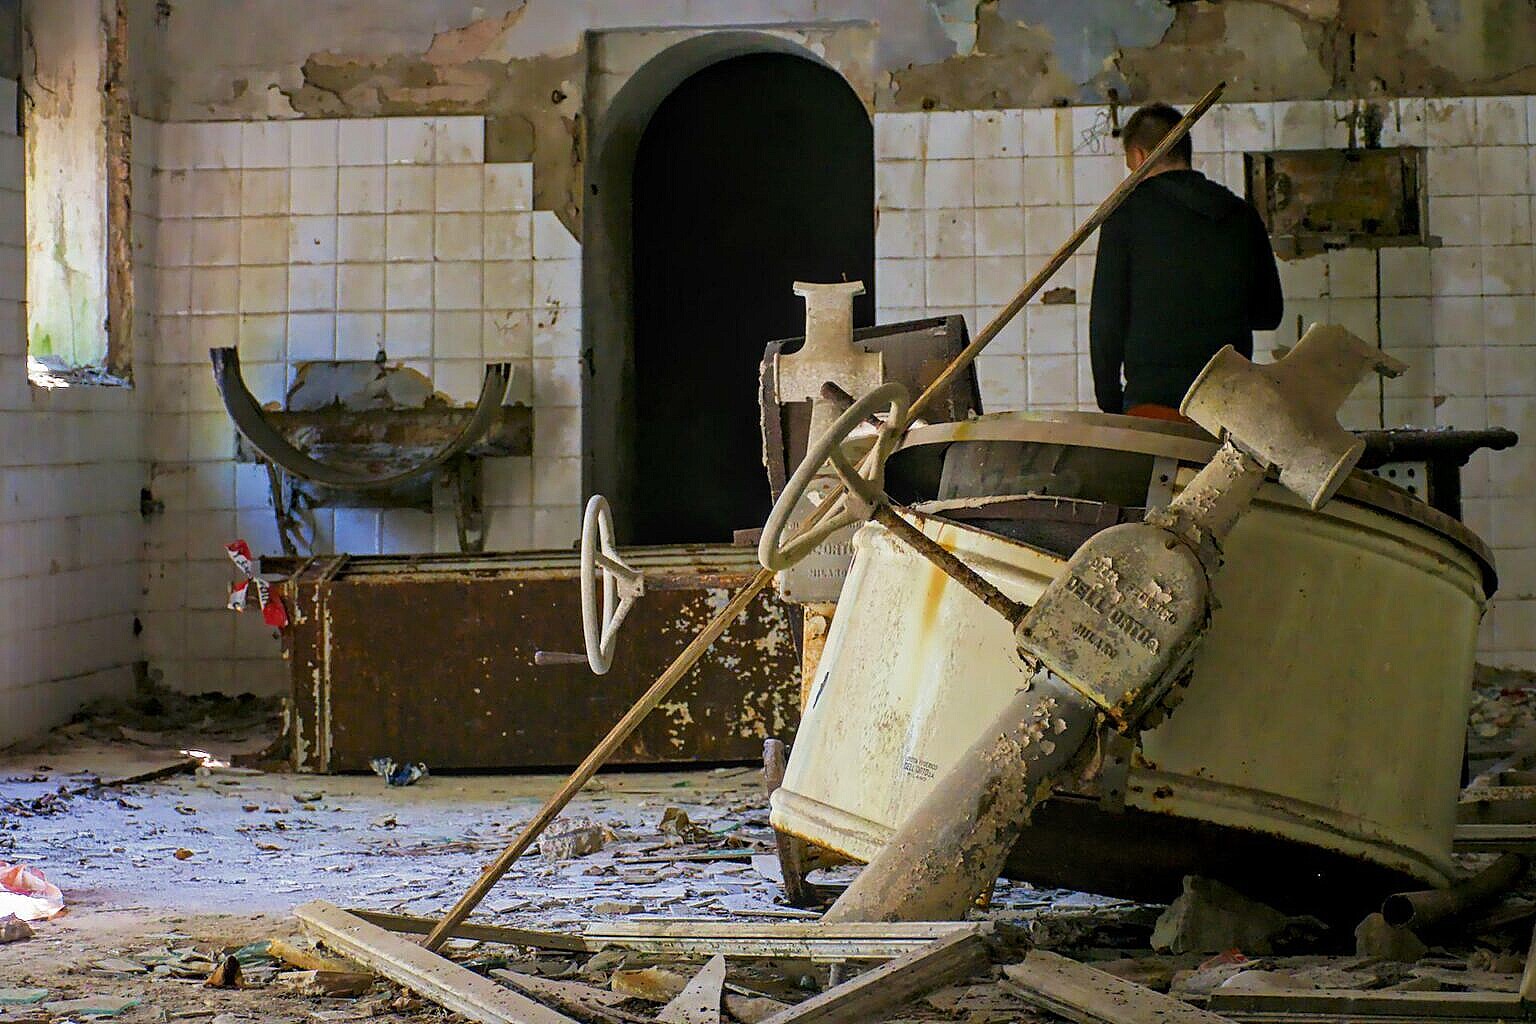 The vandalised central kitchen of the abandoned hospital on Poveglia